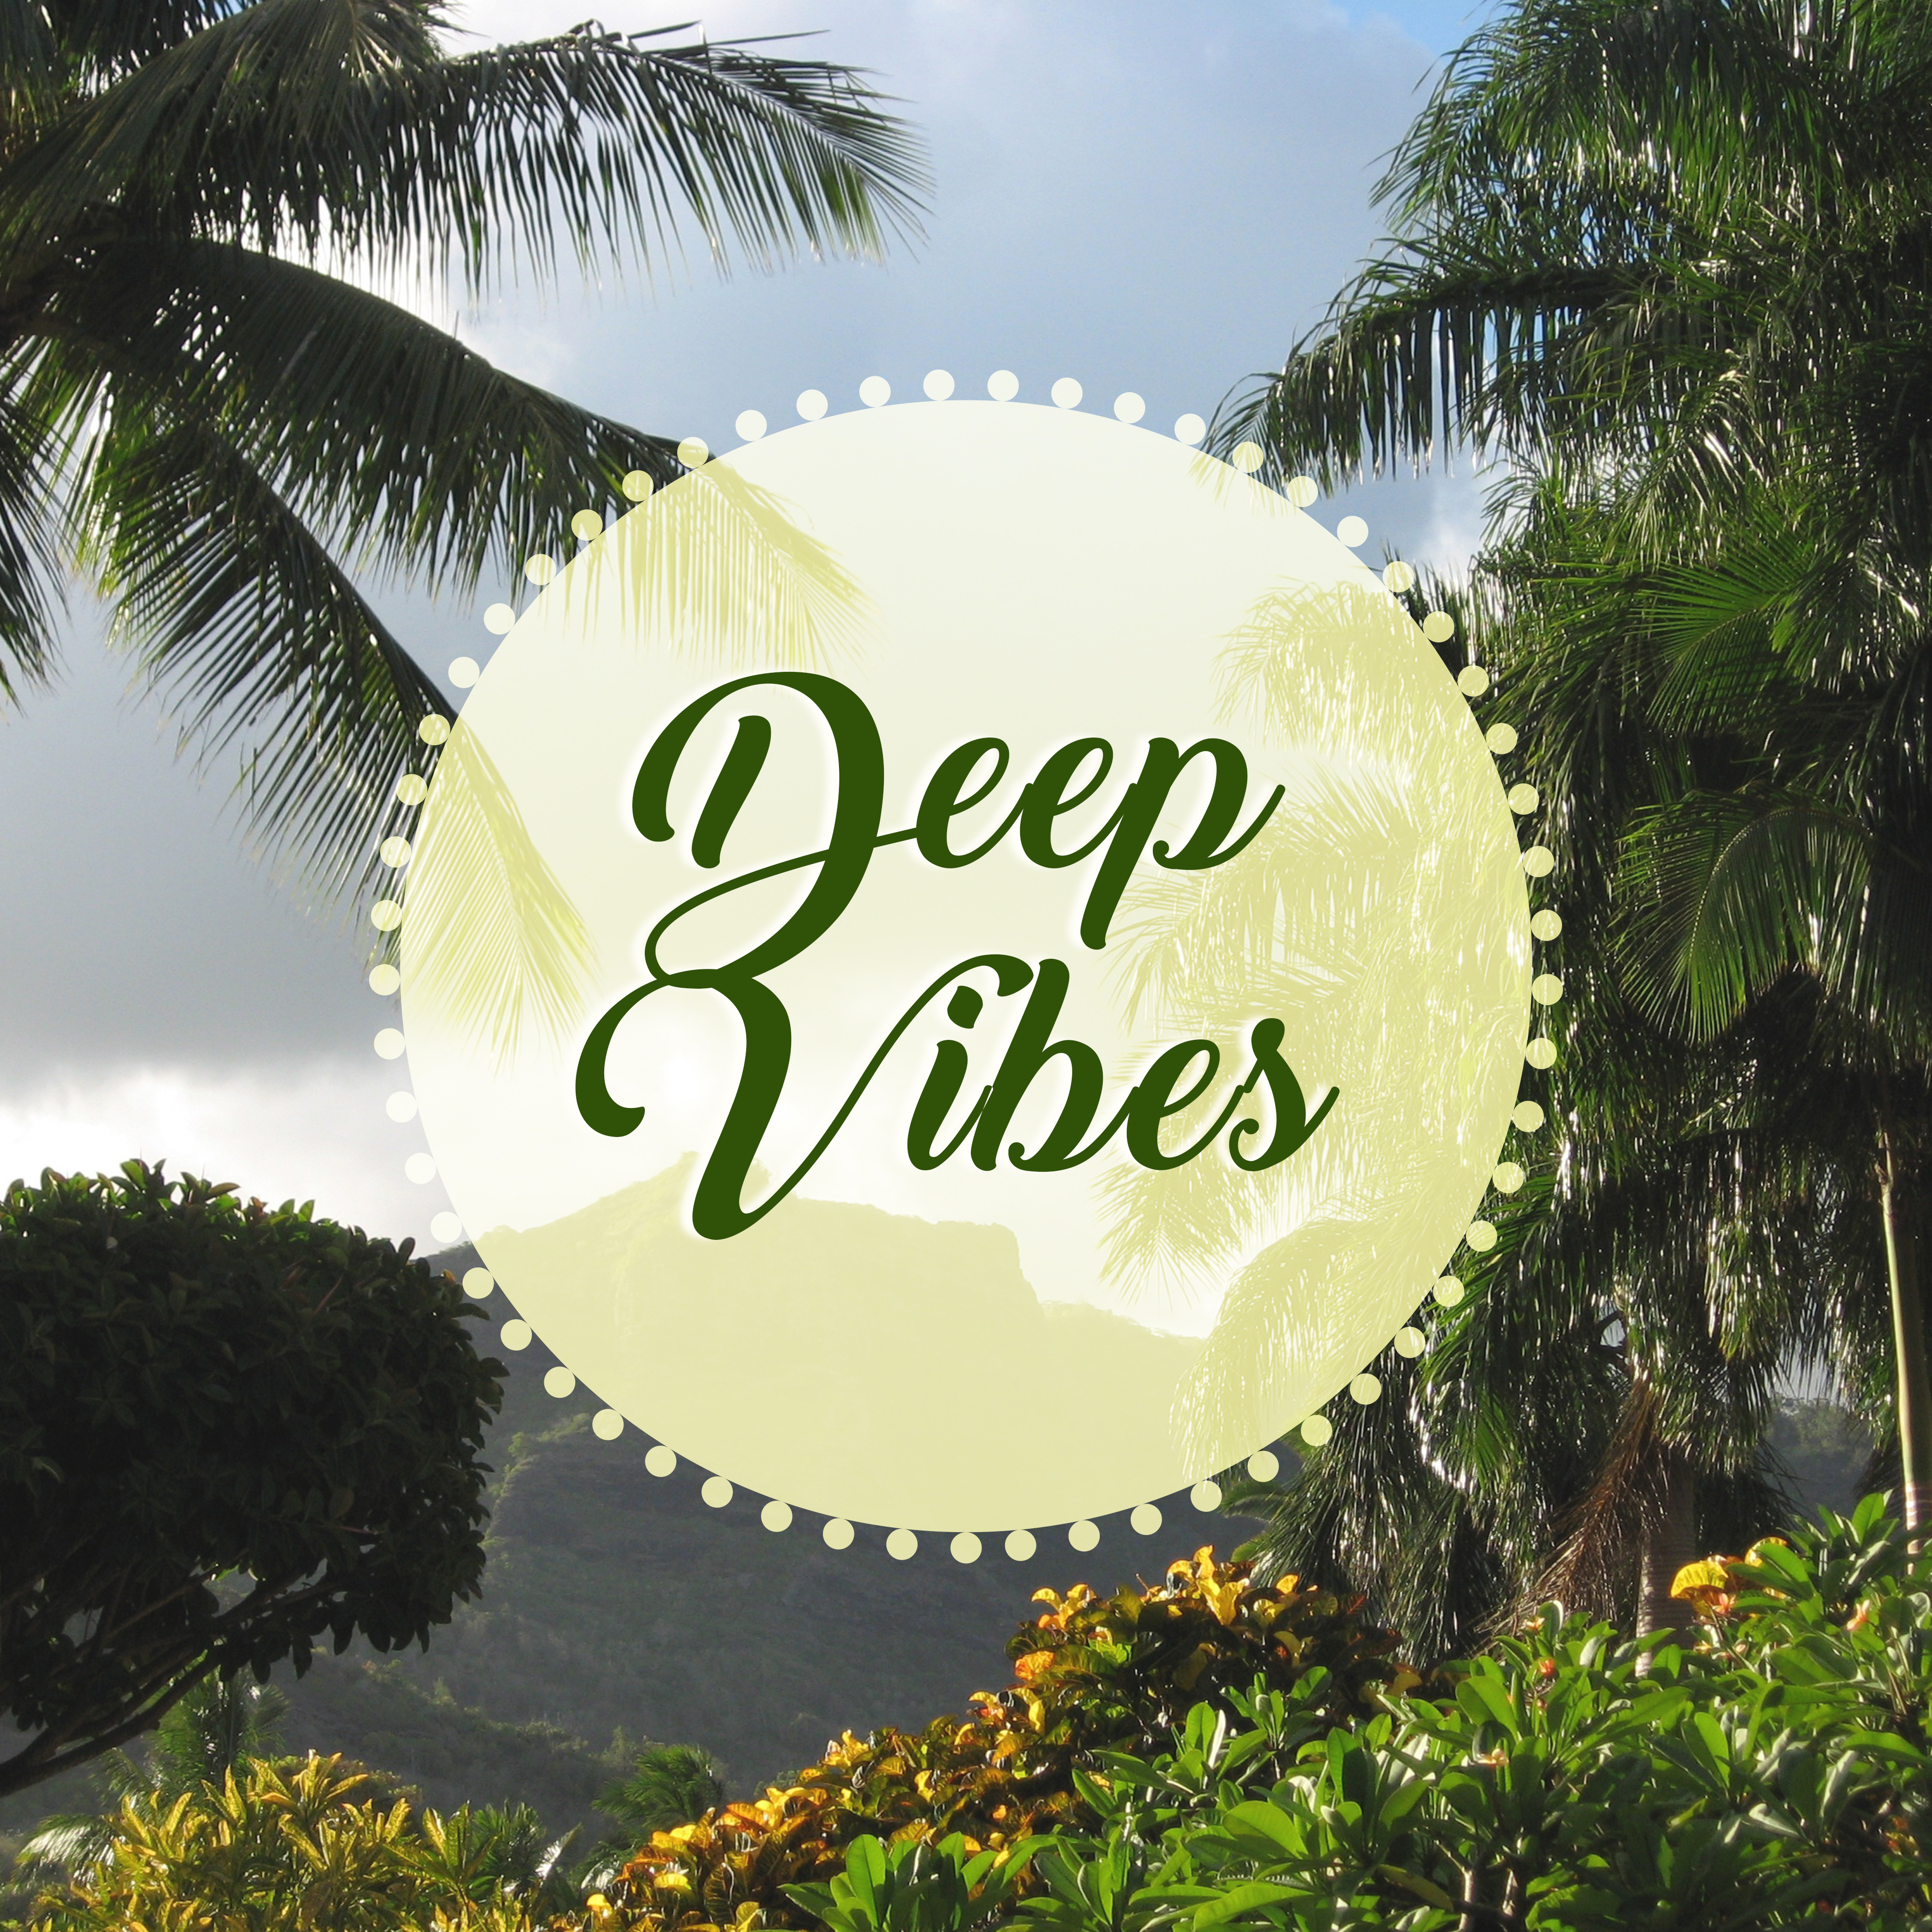 Deep Vibes  Best Chill Out Music, Relaxing Sounds, Pure Mind, Keep Calm, Just Relax, Beach Chill